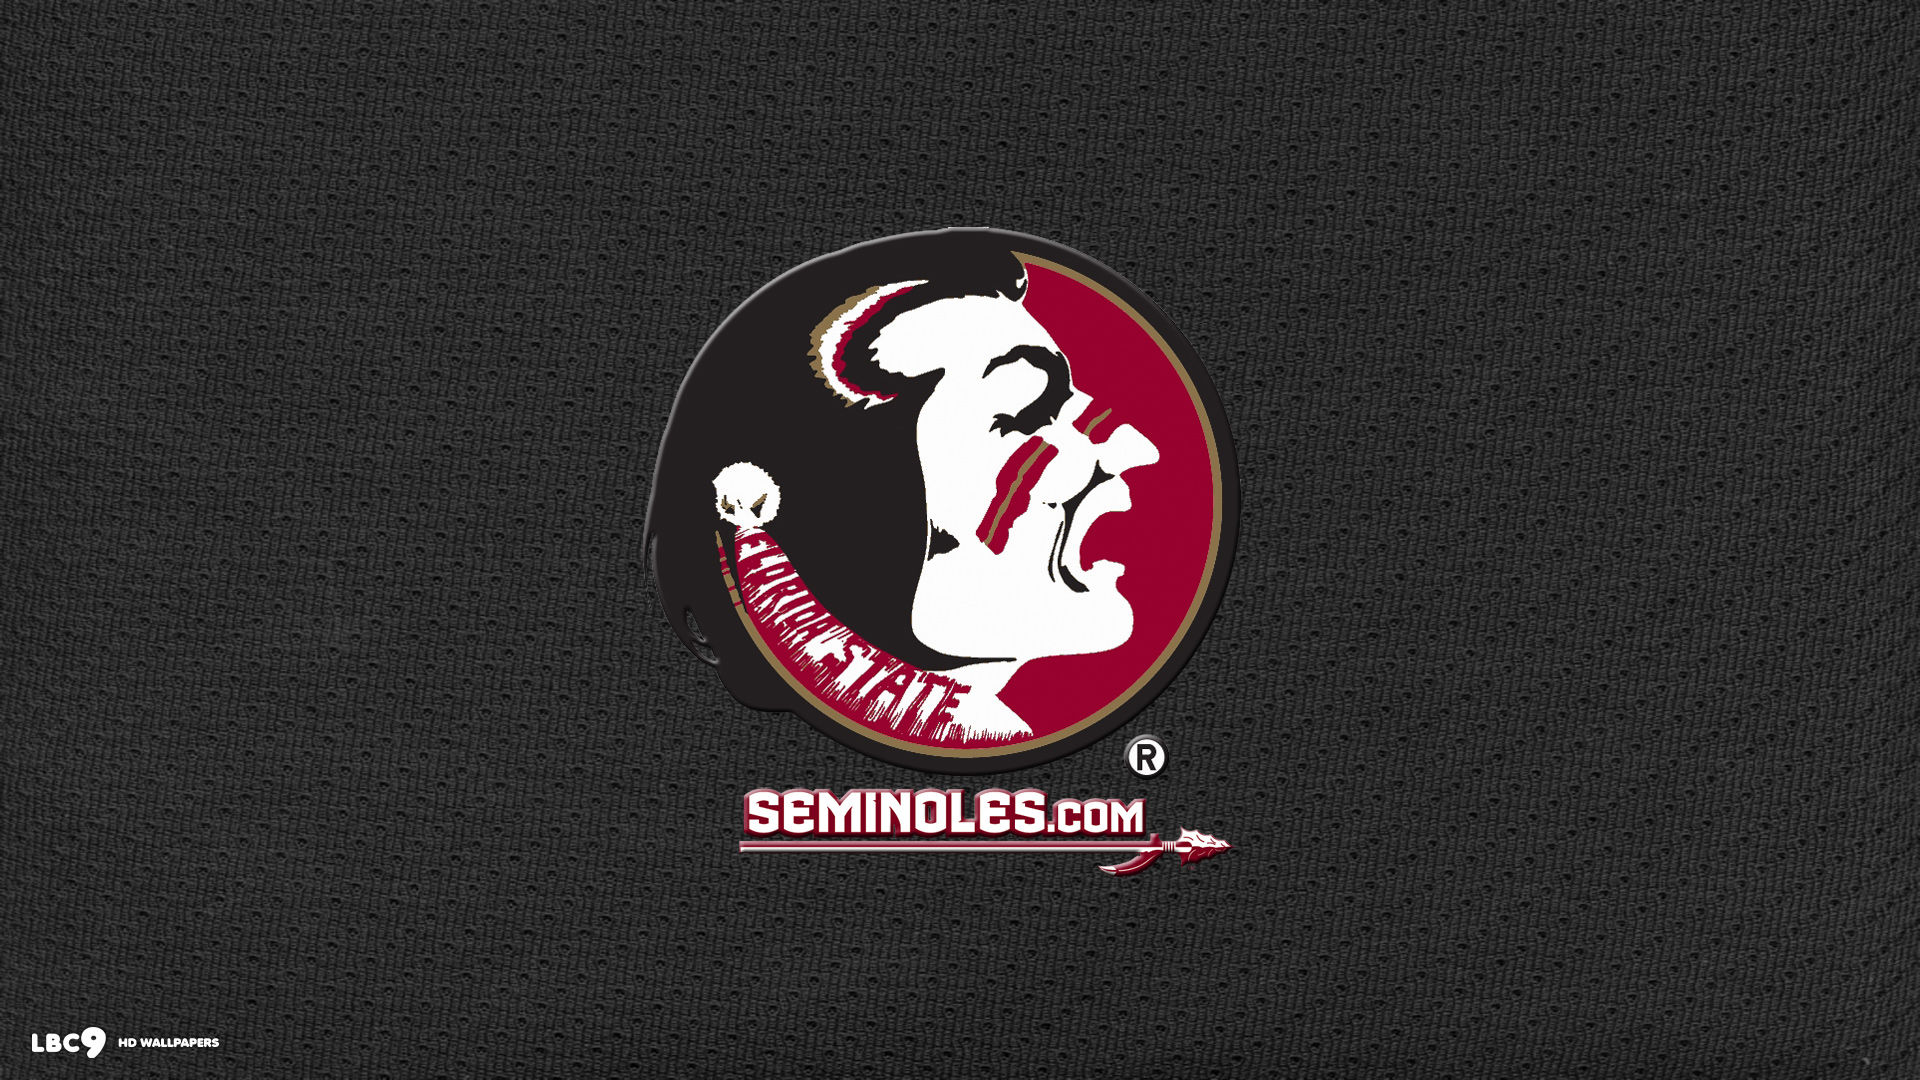 Free FSU Seminoles iPhone Wallpapers Install in seconds 21 to choose from  for every model of iPhone and iPod   Florida state university Fsu logo  Florida state